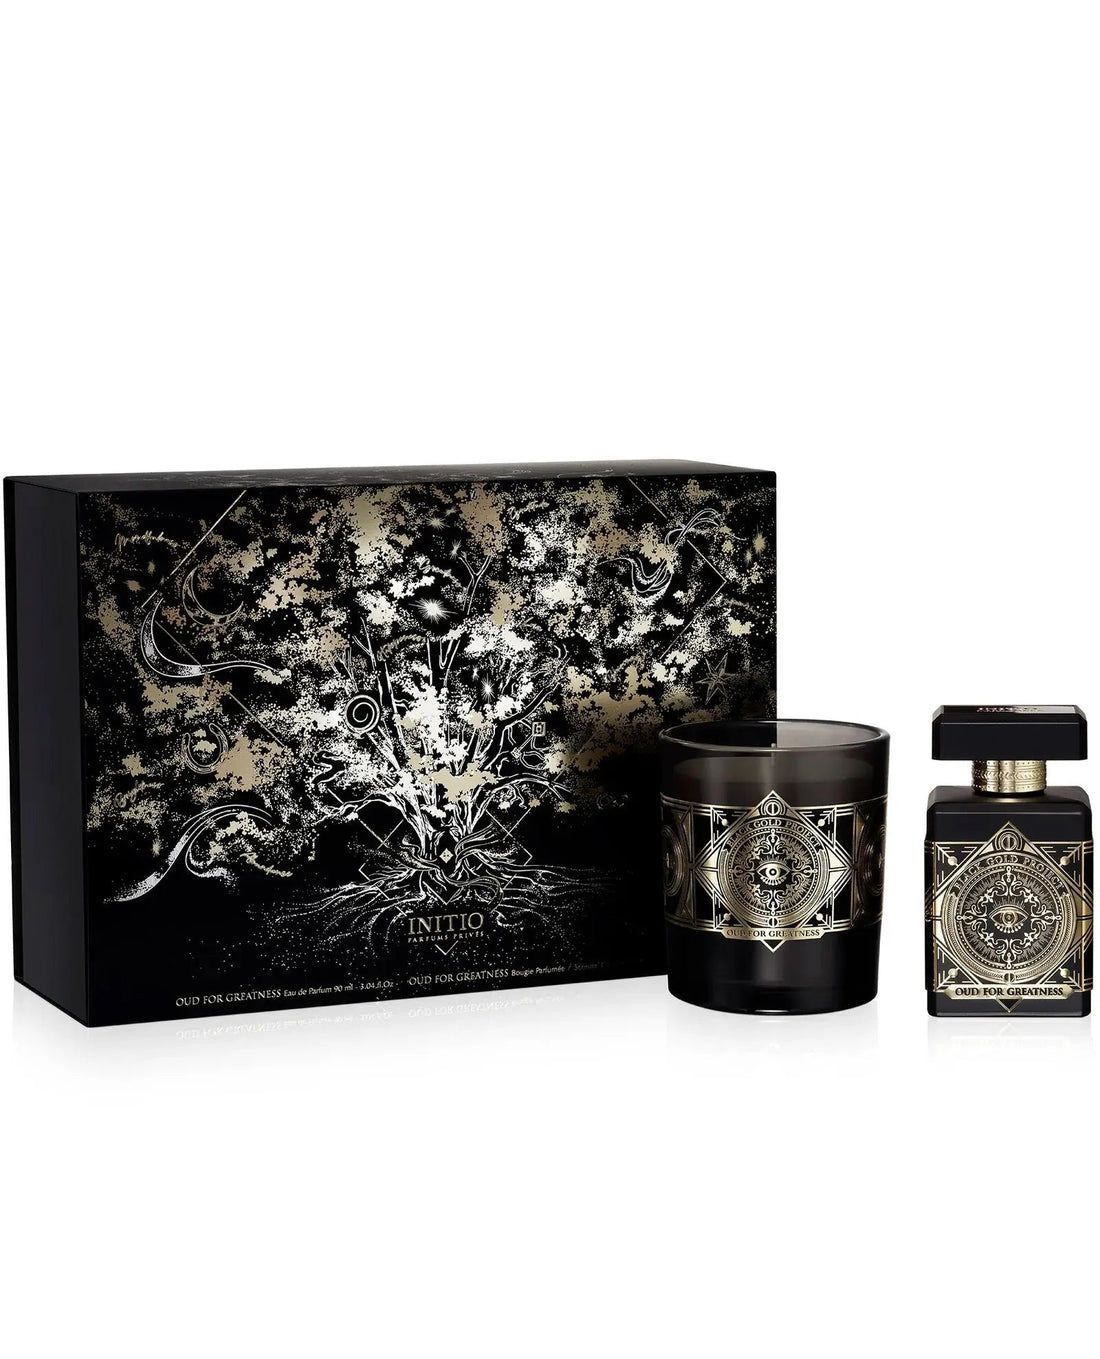 Initio Oud For Greatness set Initio 1 Pezzo